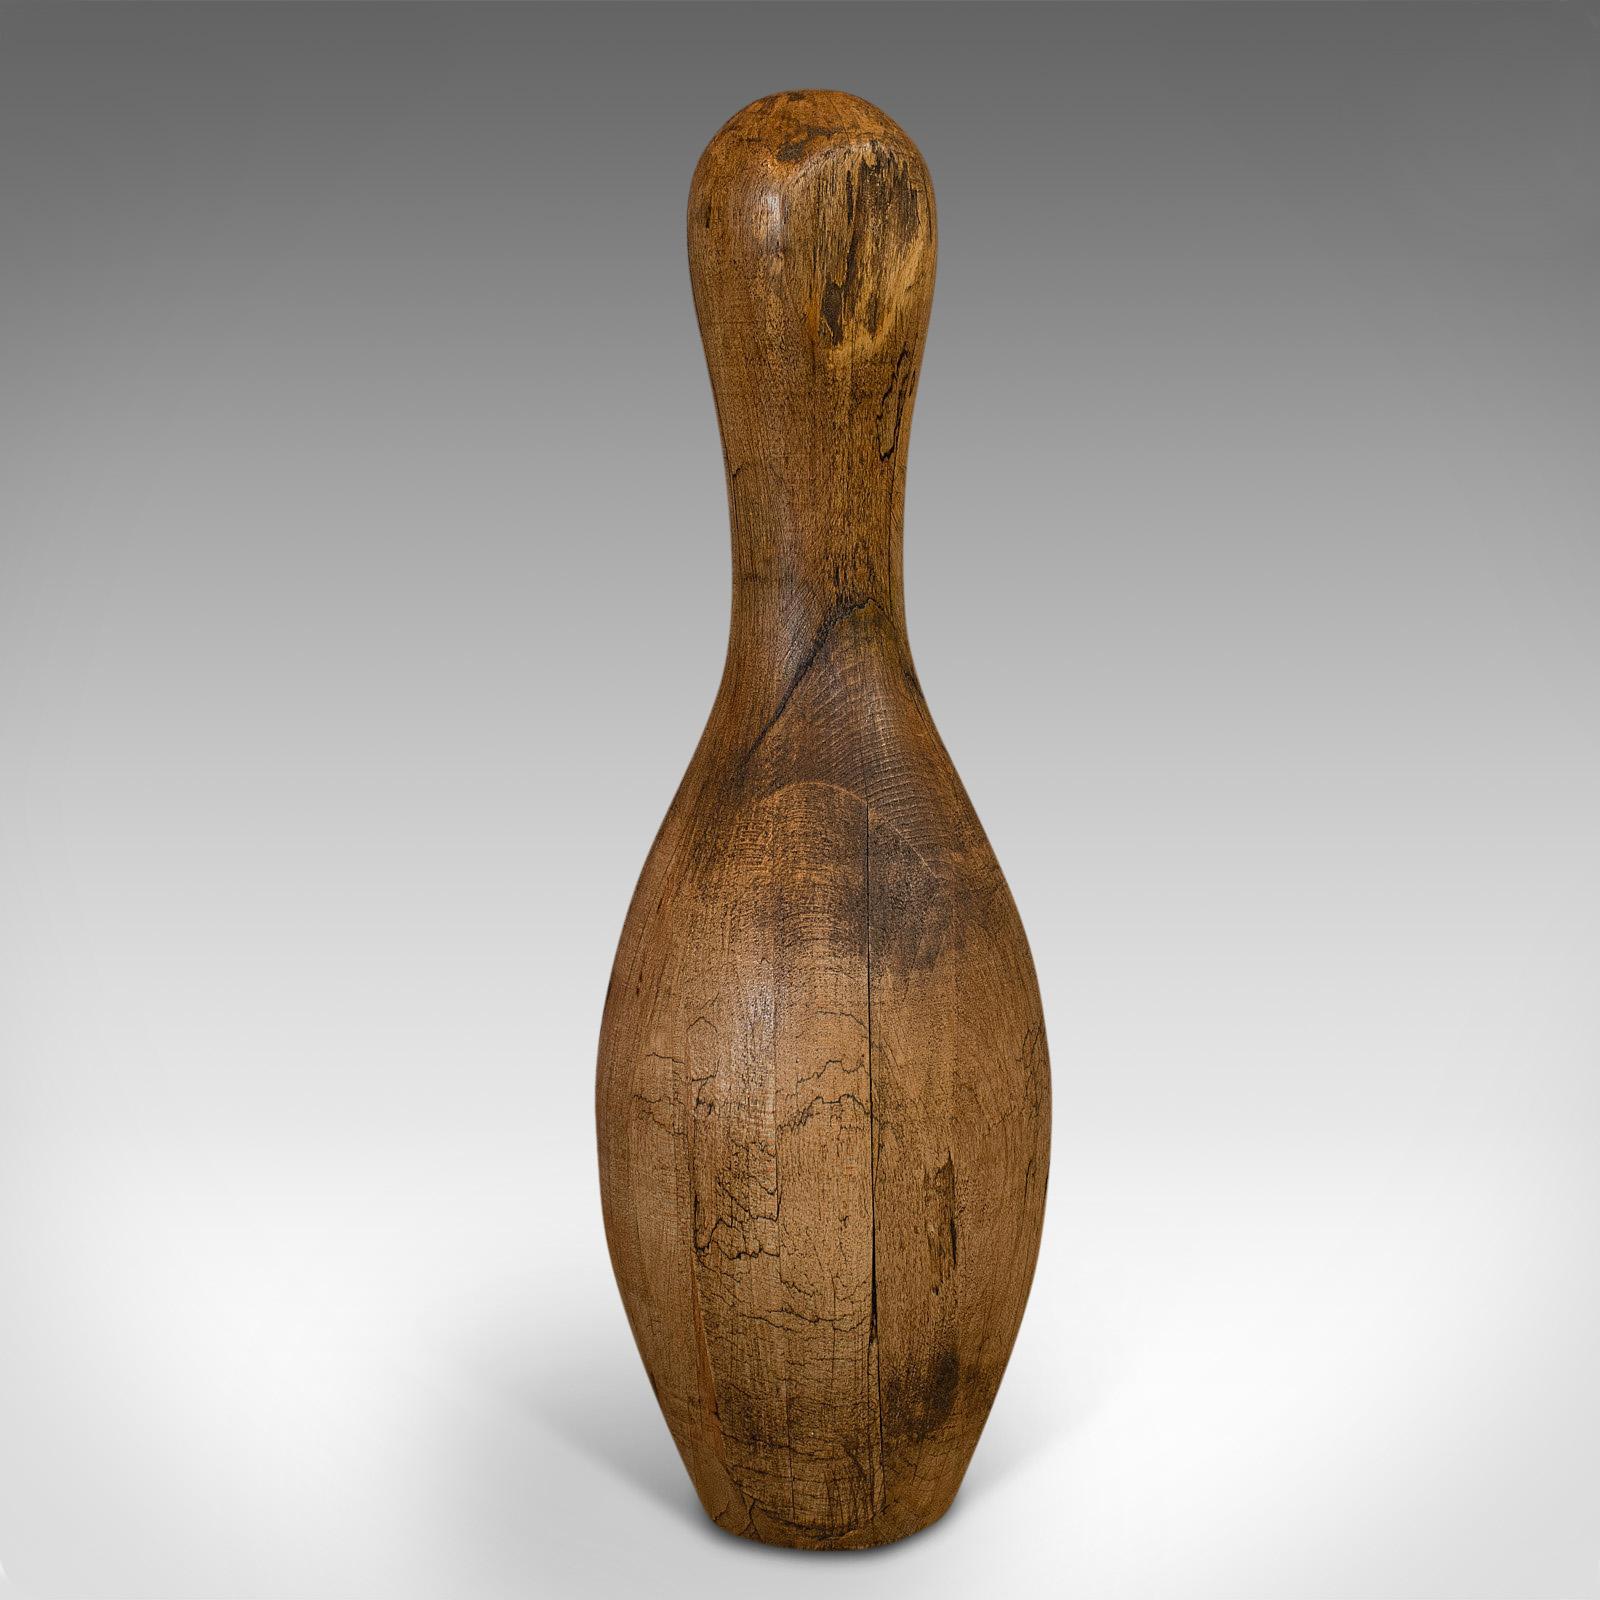 This is a vintage bowling pin. An American, beech decorative tenpin or skittle, dating to the mid-20th century, circa 1940.

Transatlantic bowl-o-rama glamour
Displays a desirable aged patina
Select beech with fine grain interest
Appealing,